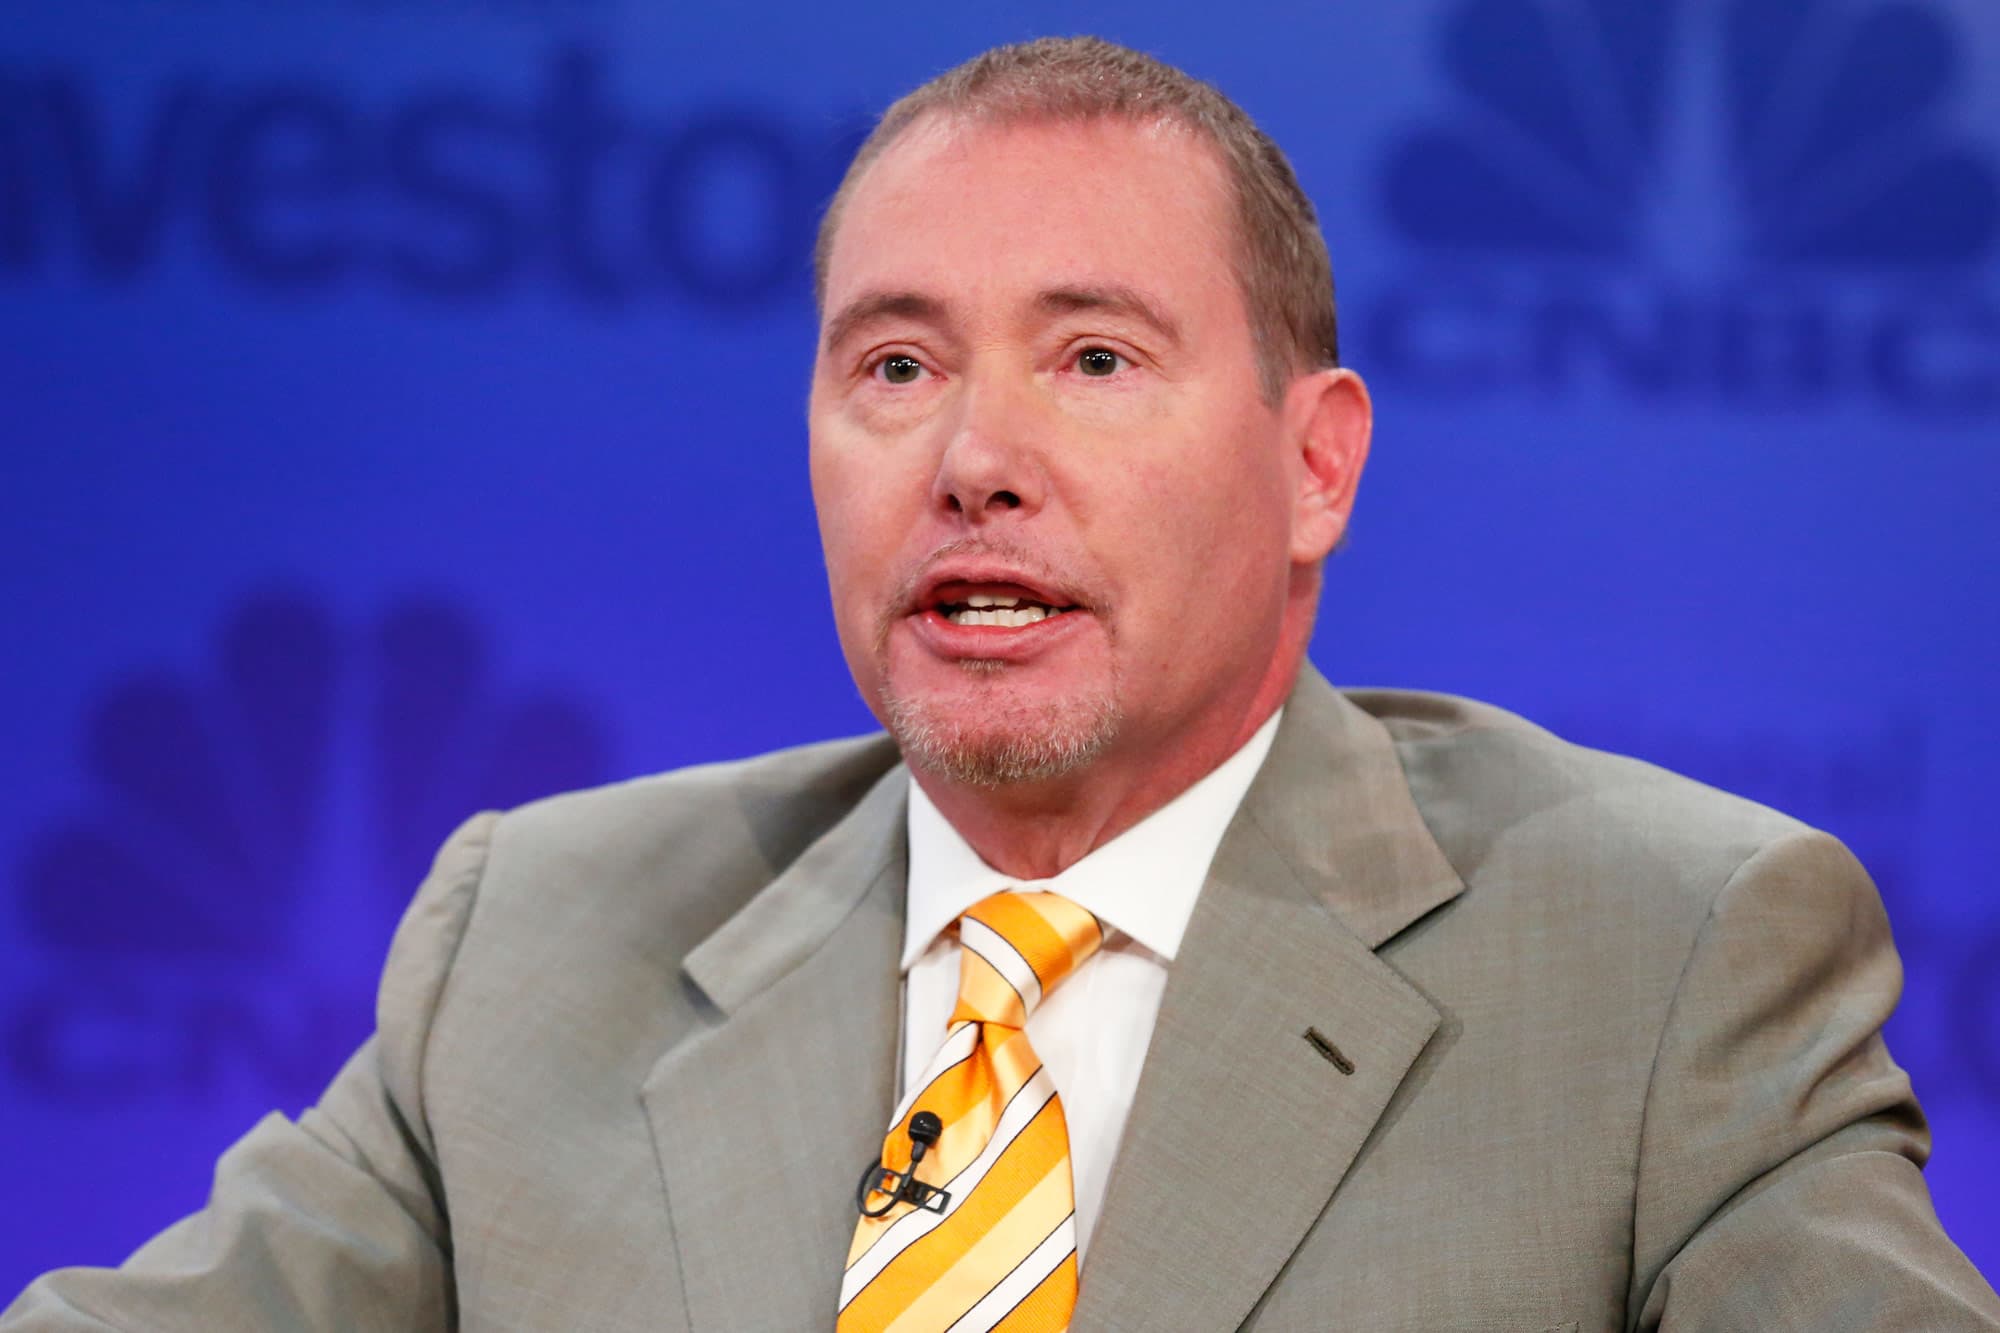 Jeffrey Gundlach is buying Treasuries after calling bond market most attractive in 10 years